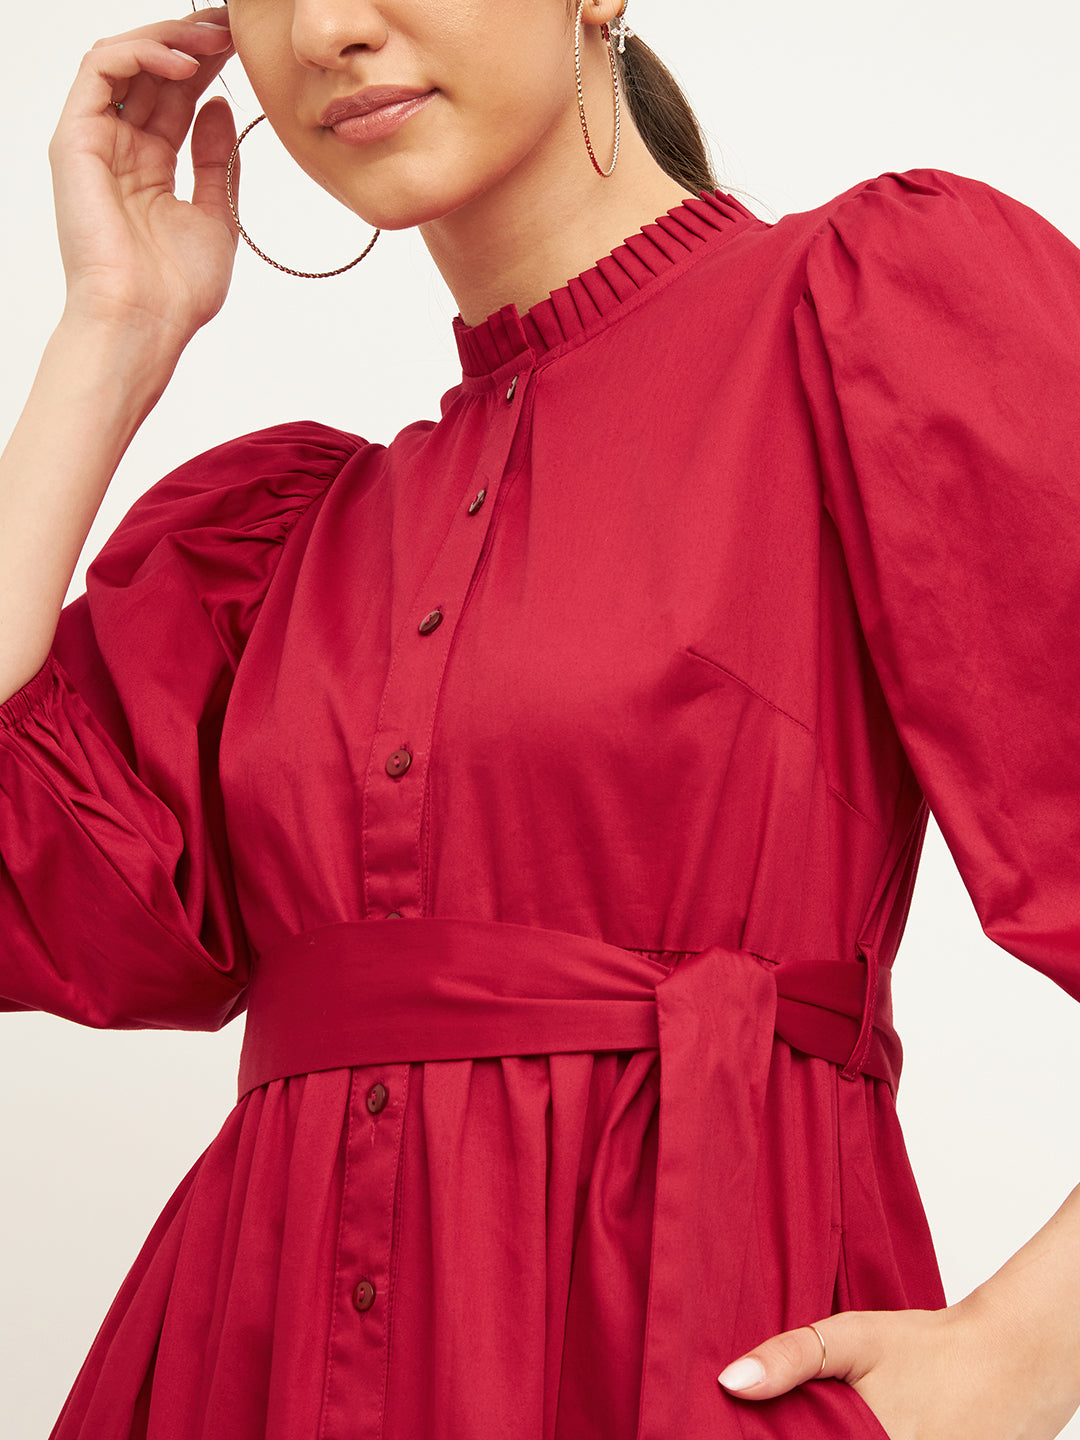 Red Cotton Tiered Fit & Flare Midi Dress